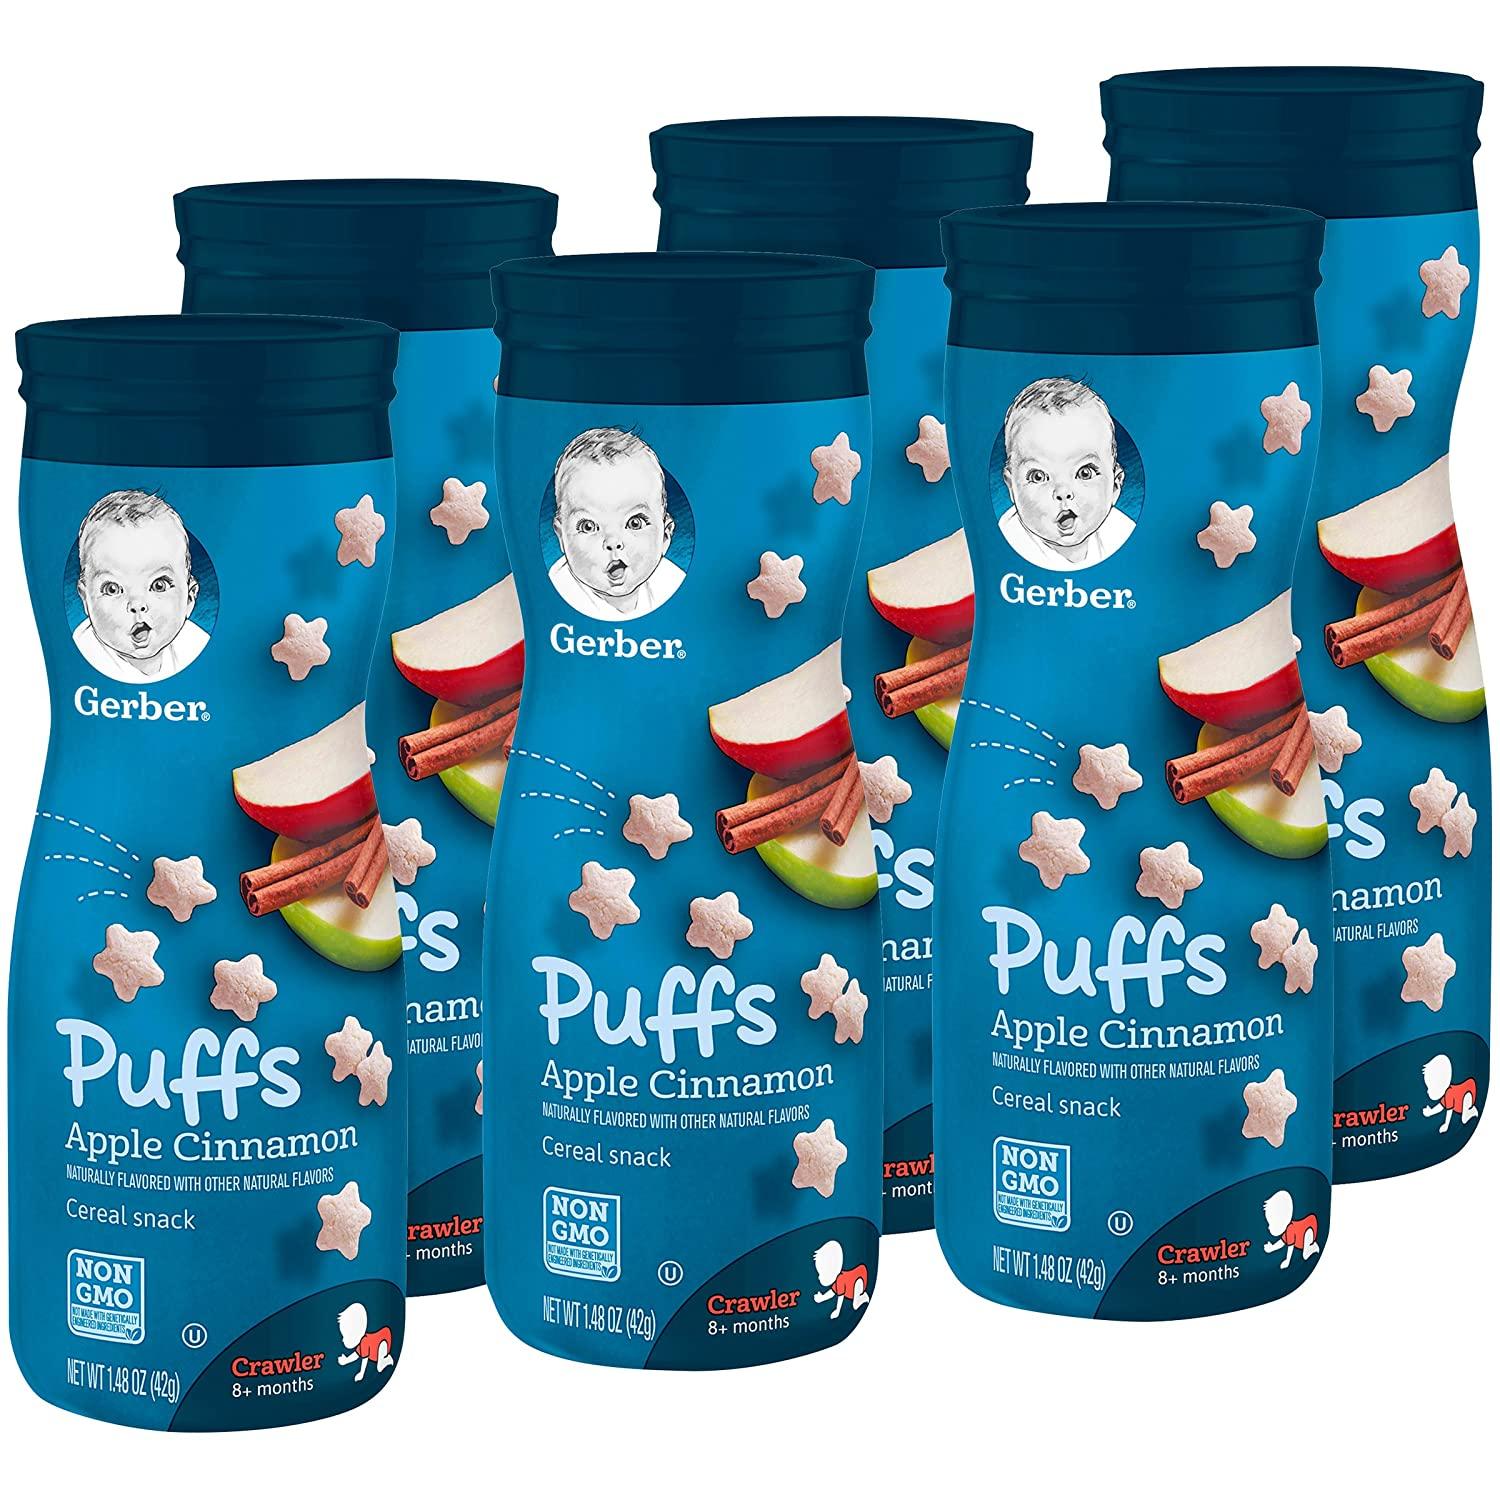 6 Gerber Puffs Apple Cinnamon Cereal Snack for $8.61 Shipped